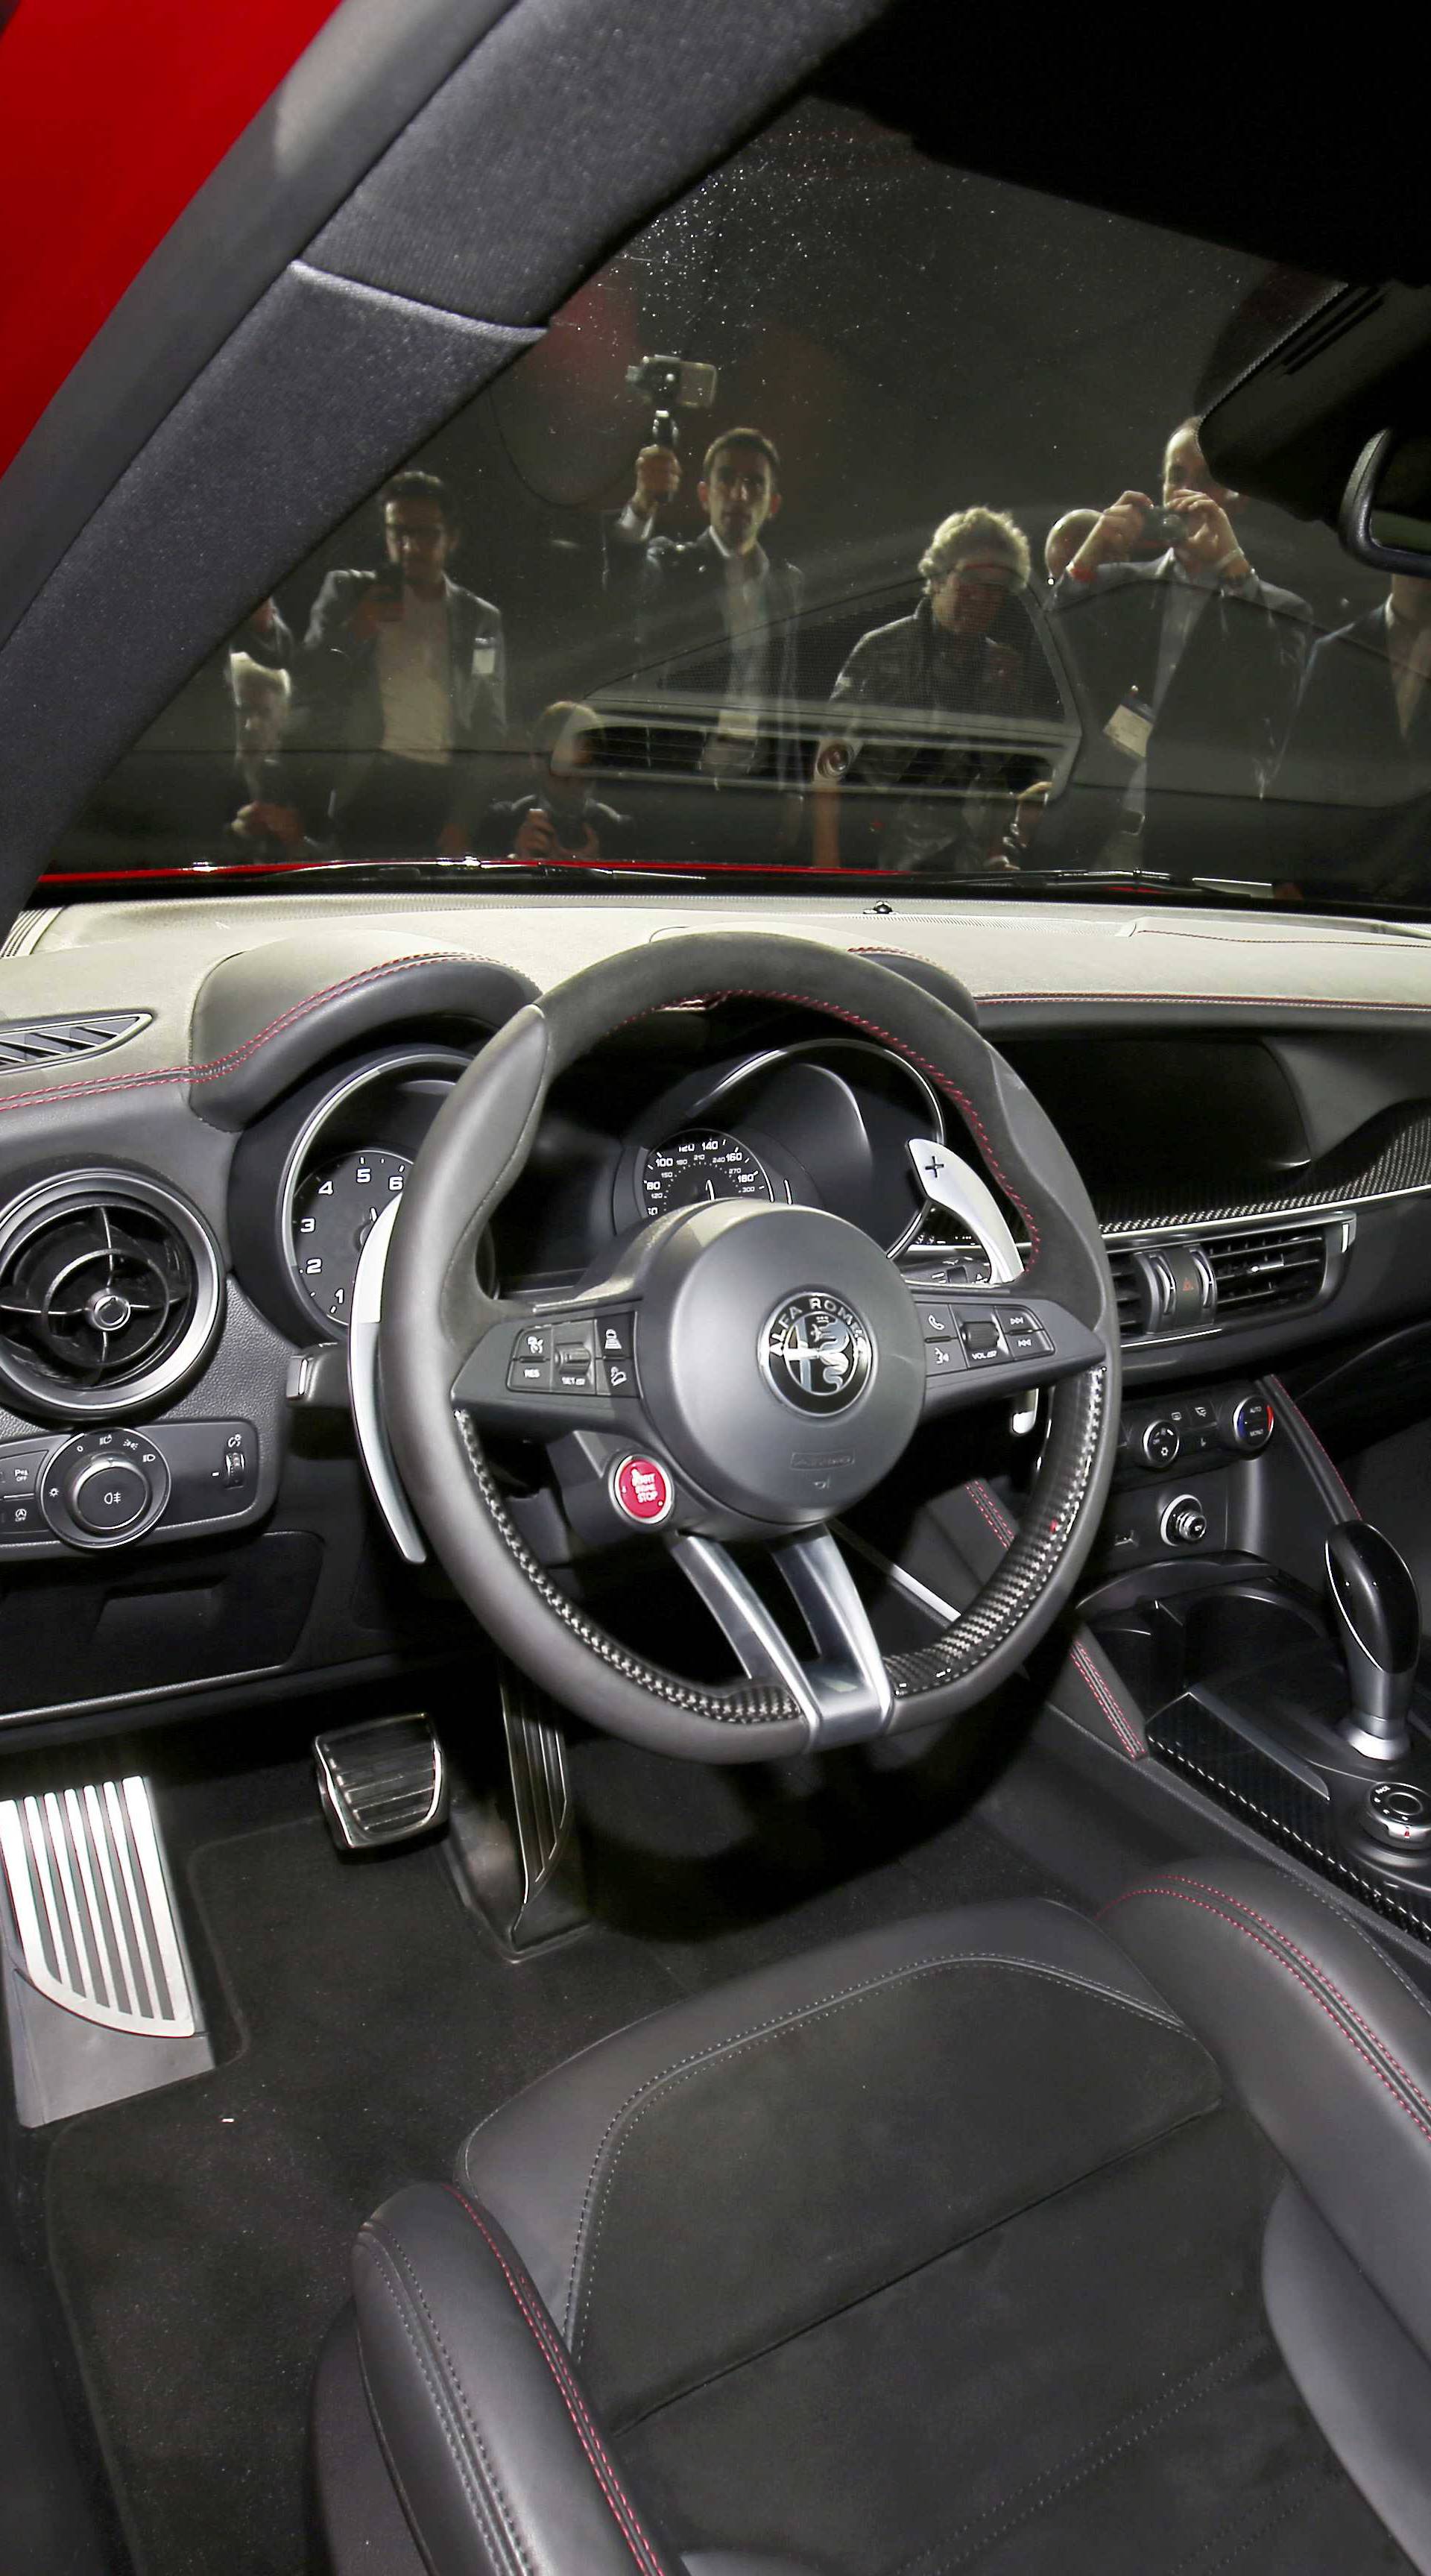 People look over the interior of the car as Alfa Romeo introduces the 2018 Stelvio SUV at the 2016 Los Angeles Auto Show in Los Angeles